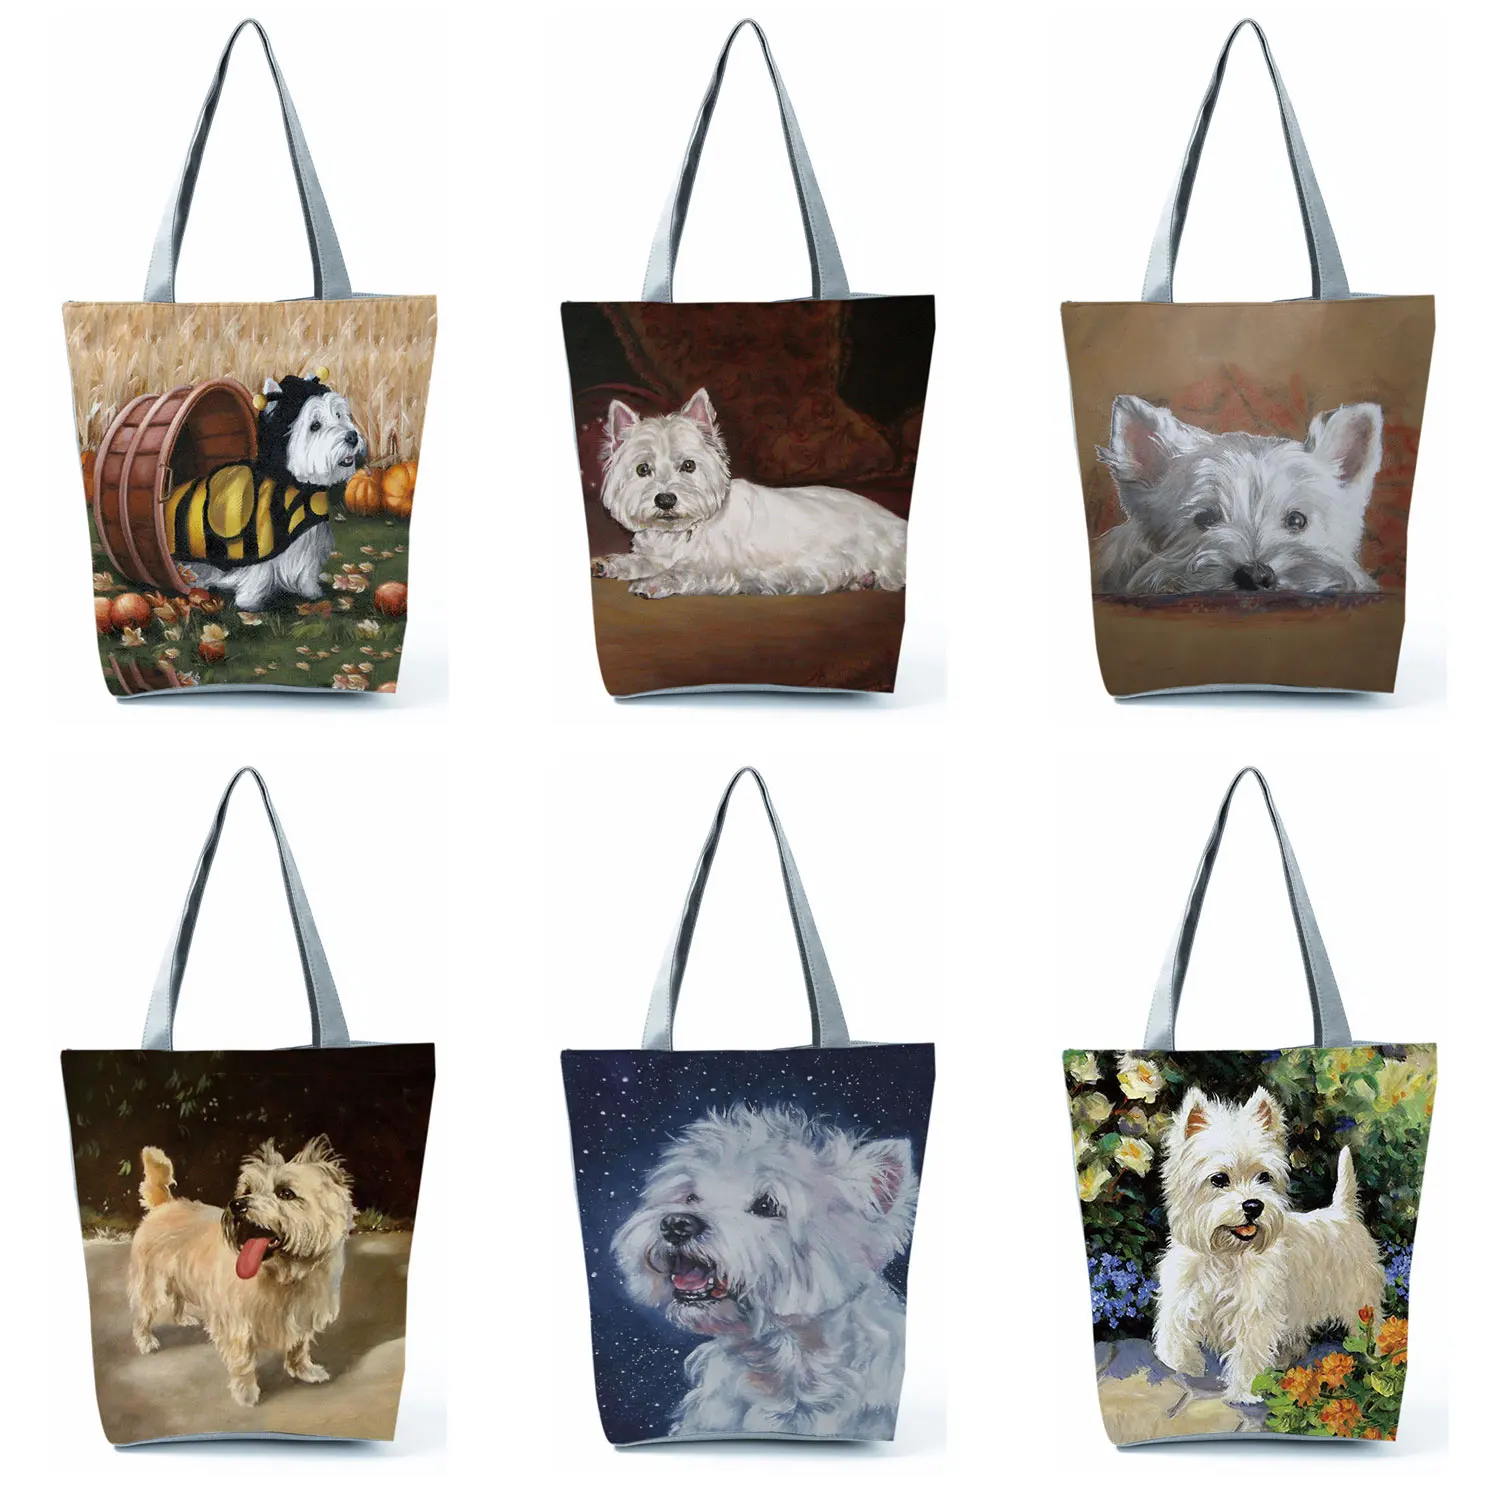 

Unique Design Westie Dog Painting Square Handbags Casual for Women Shopping Shopper Bags Large Capacity Eco Totes Custom Pattern